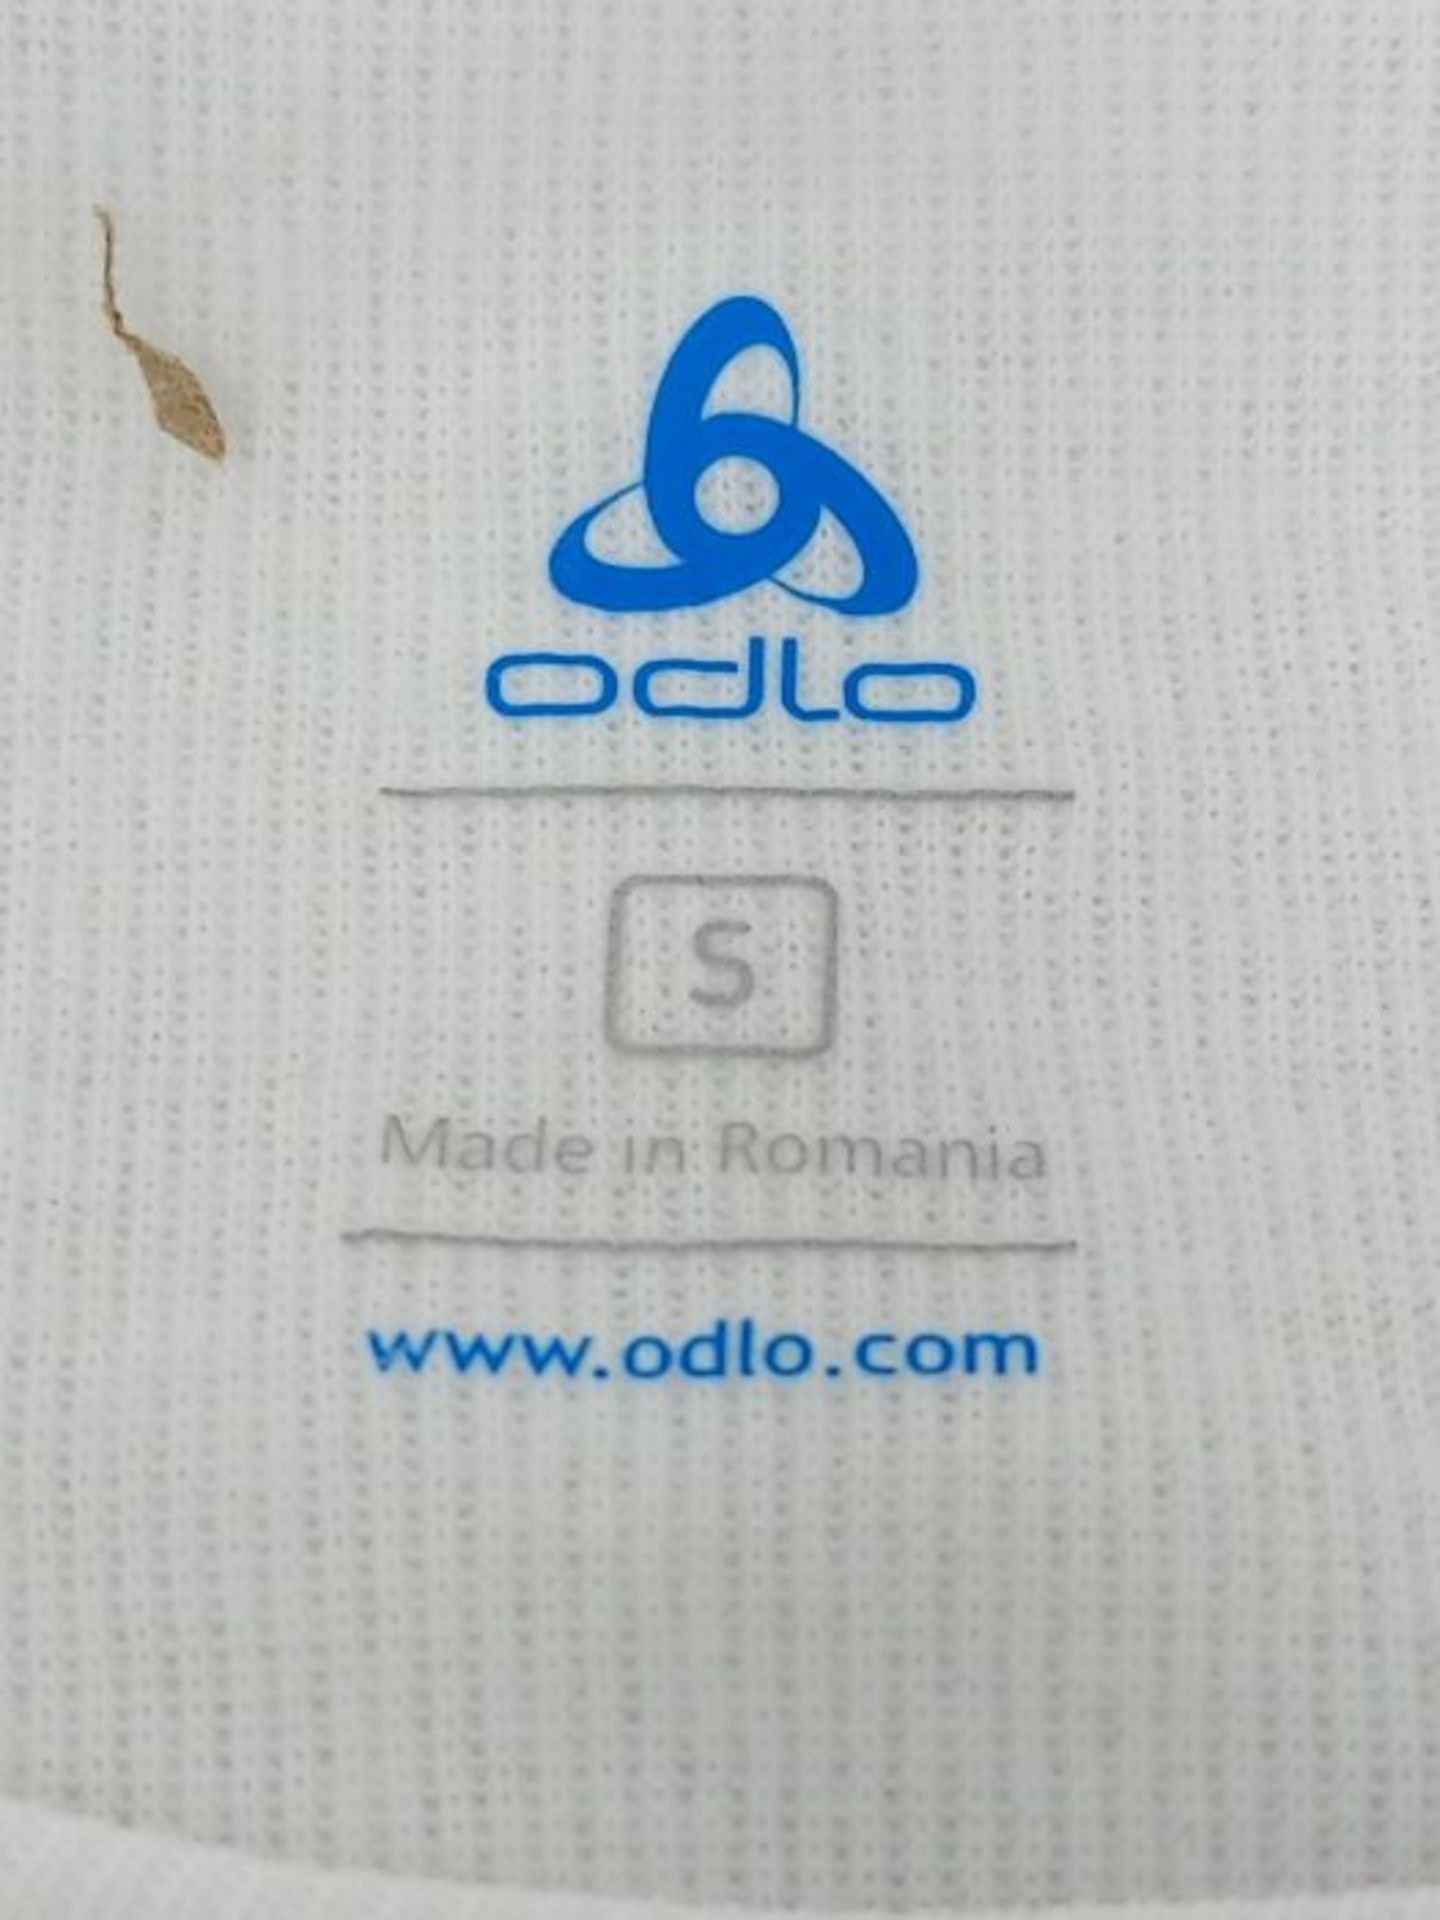 ODLO(??? Women Bl Top Crew Neck L/S Active Warm Top - White, Small - Image 3 of 3